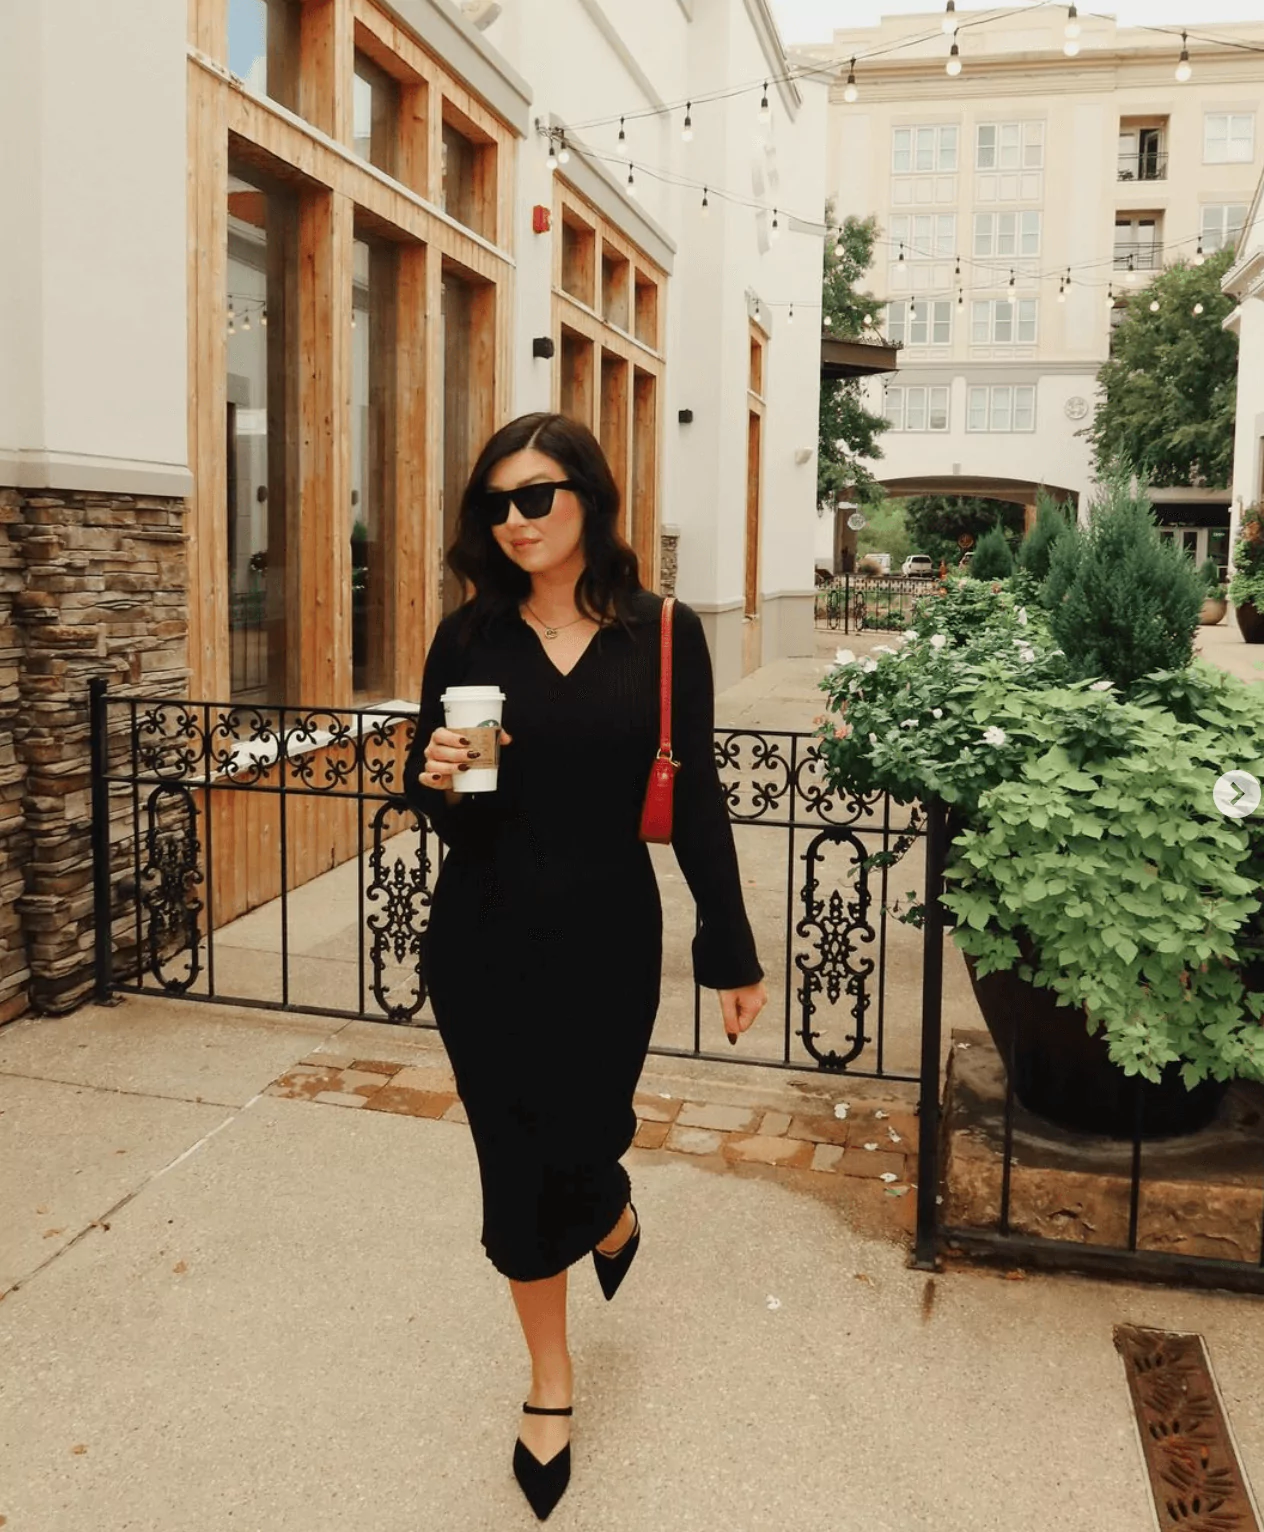 8 In-Betweener Influencers to Follow For Mid-Size Fashion